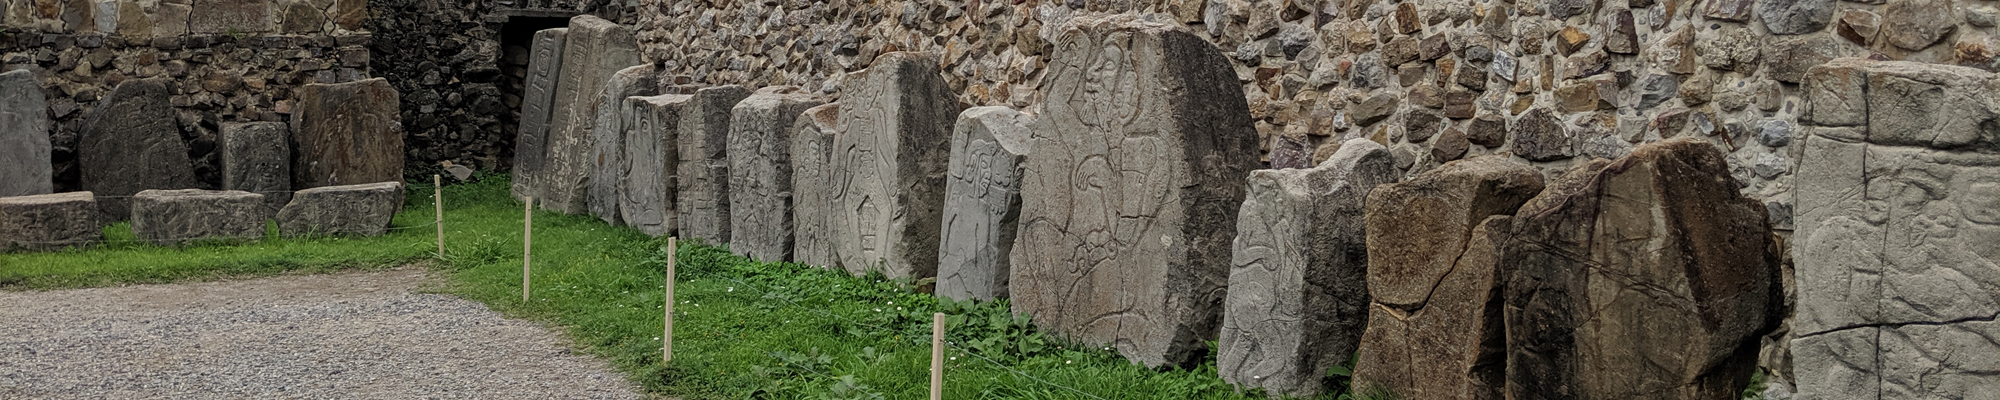 Glyphs from Monte Alban